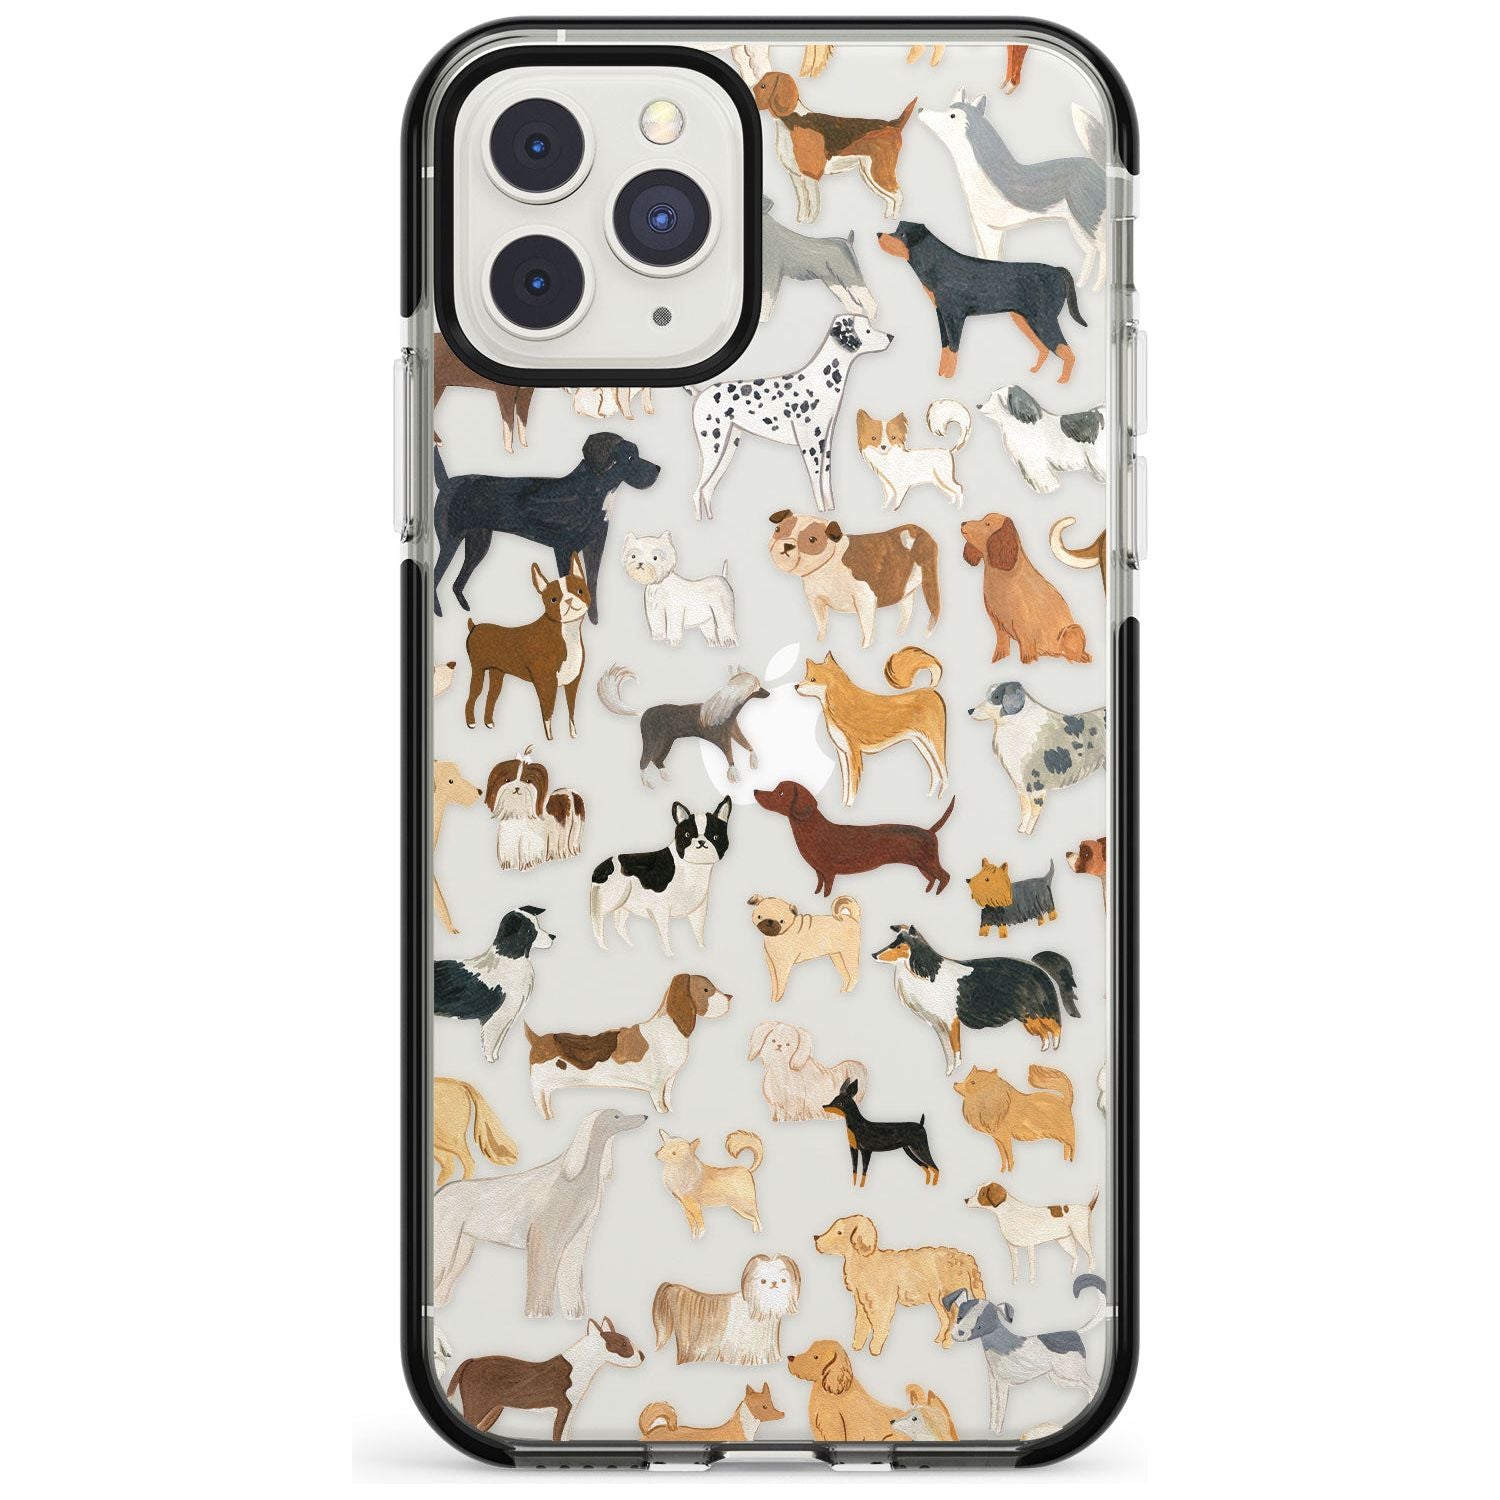 Hand Painted Dogs Black Impact Phone Case for iPhone 11 Pro Max